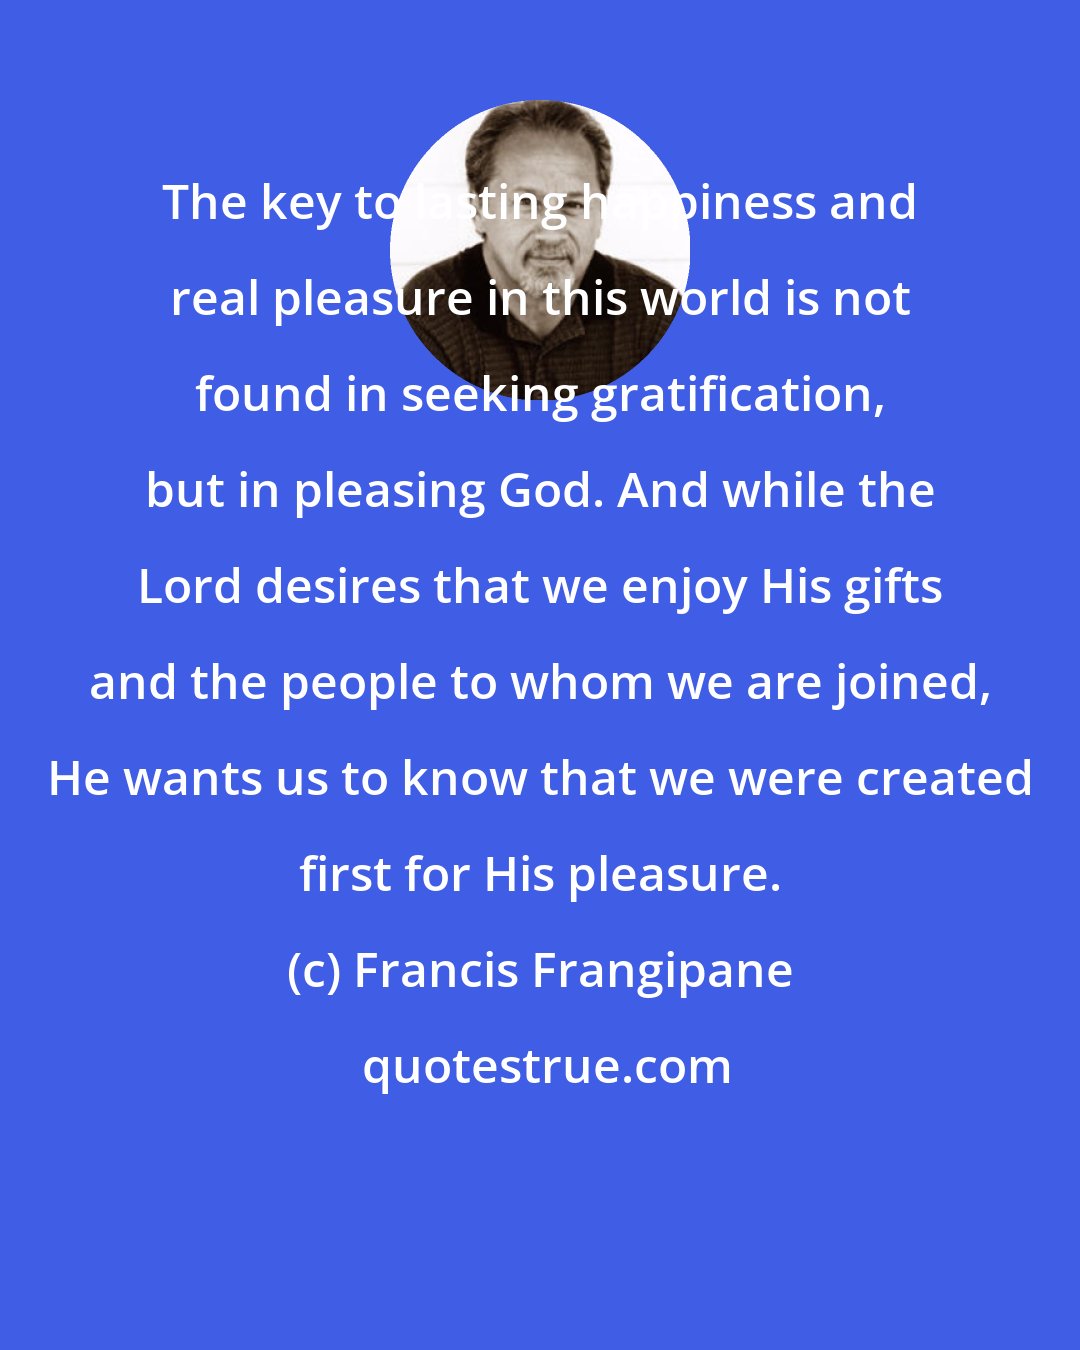 Francis Frangipane: The key to lasting happiness and real pleasure in this world is not found in seeking gratification, but in pleasing God. And while the Lord desires that we enjoy His gifts and the people to whom we are joined, He wants us to know that we were created first for His pleasure.